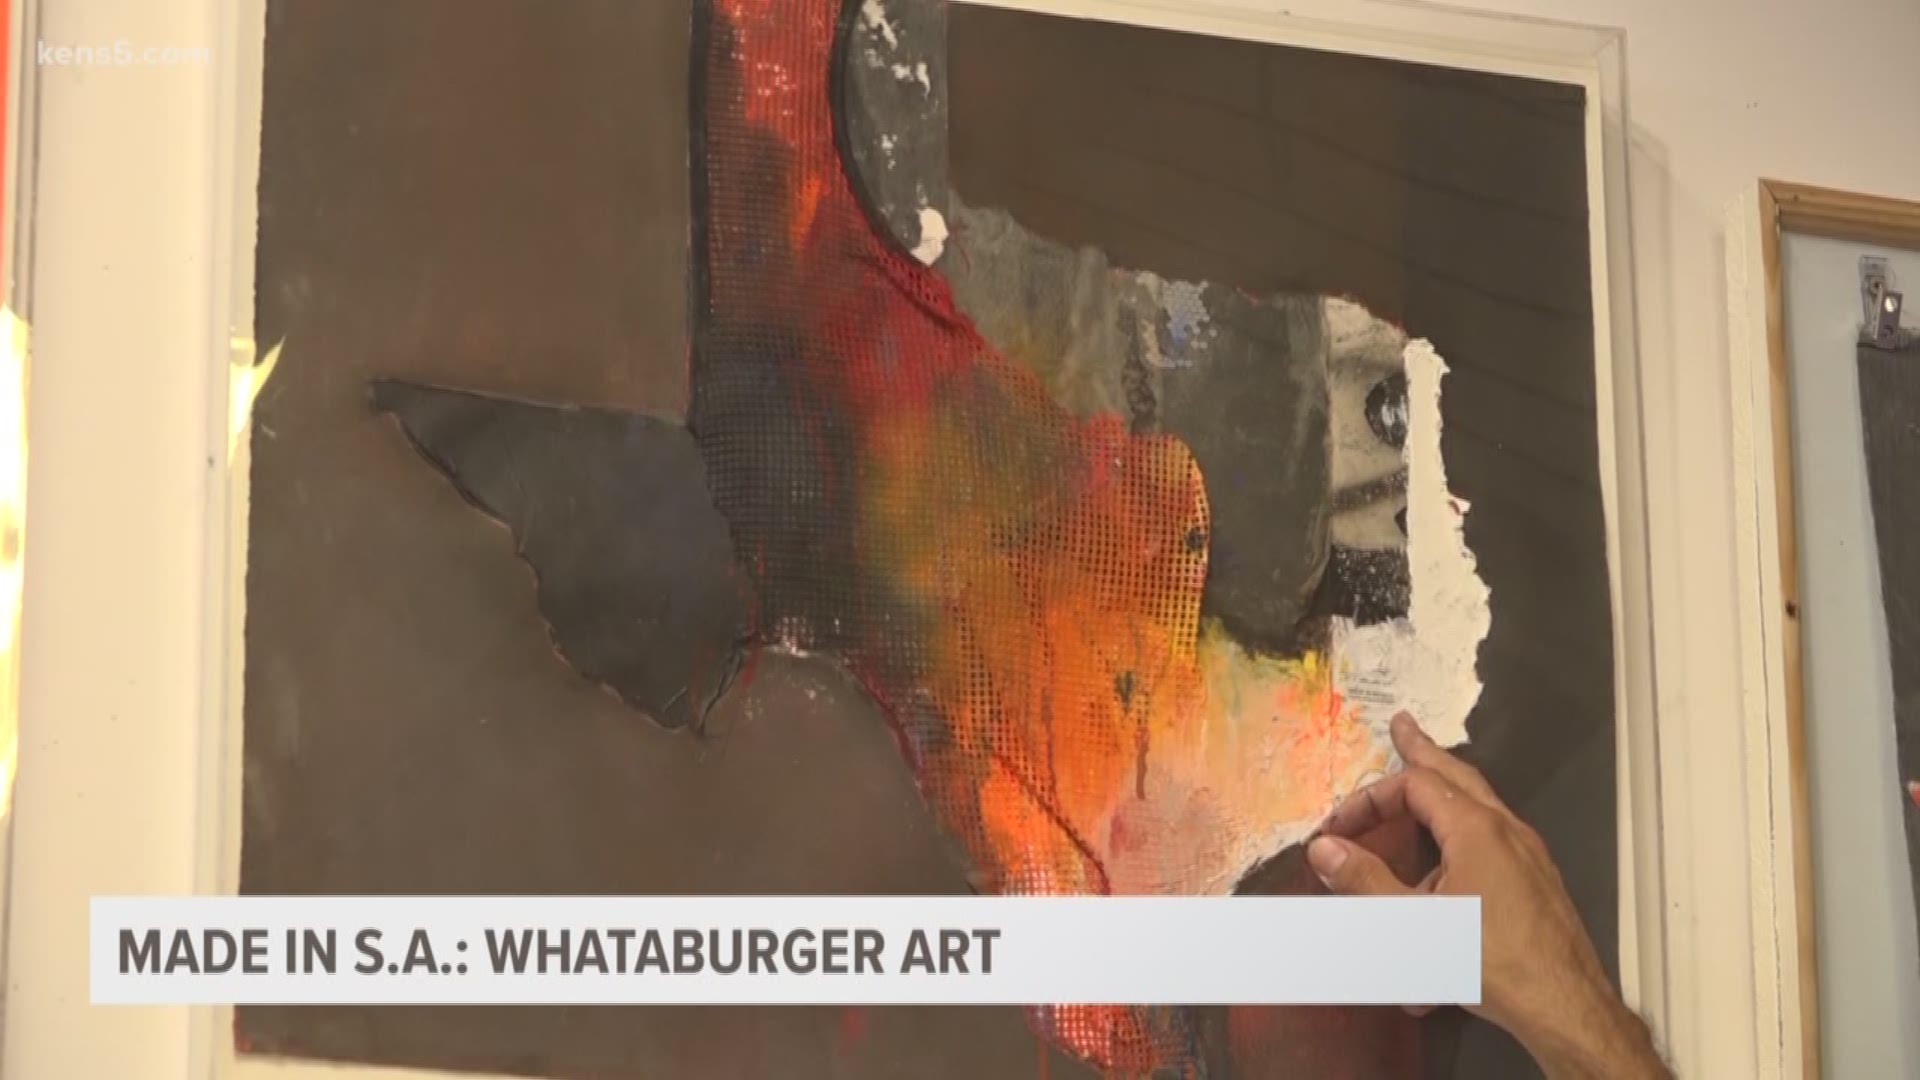 A local artist Raul Gonzalez creates works of art inspired by Whataburger.